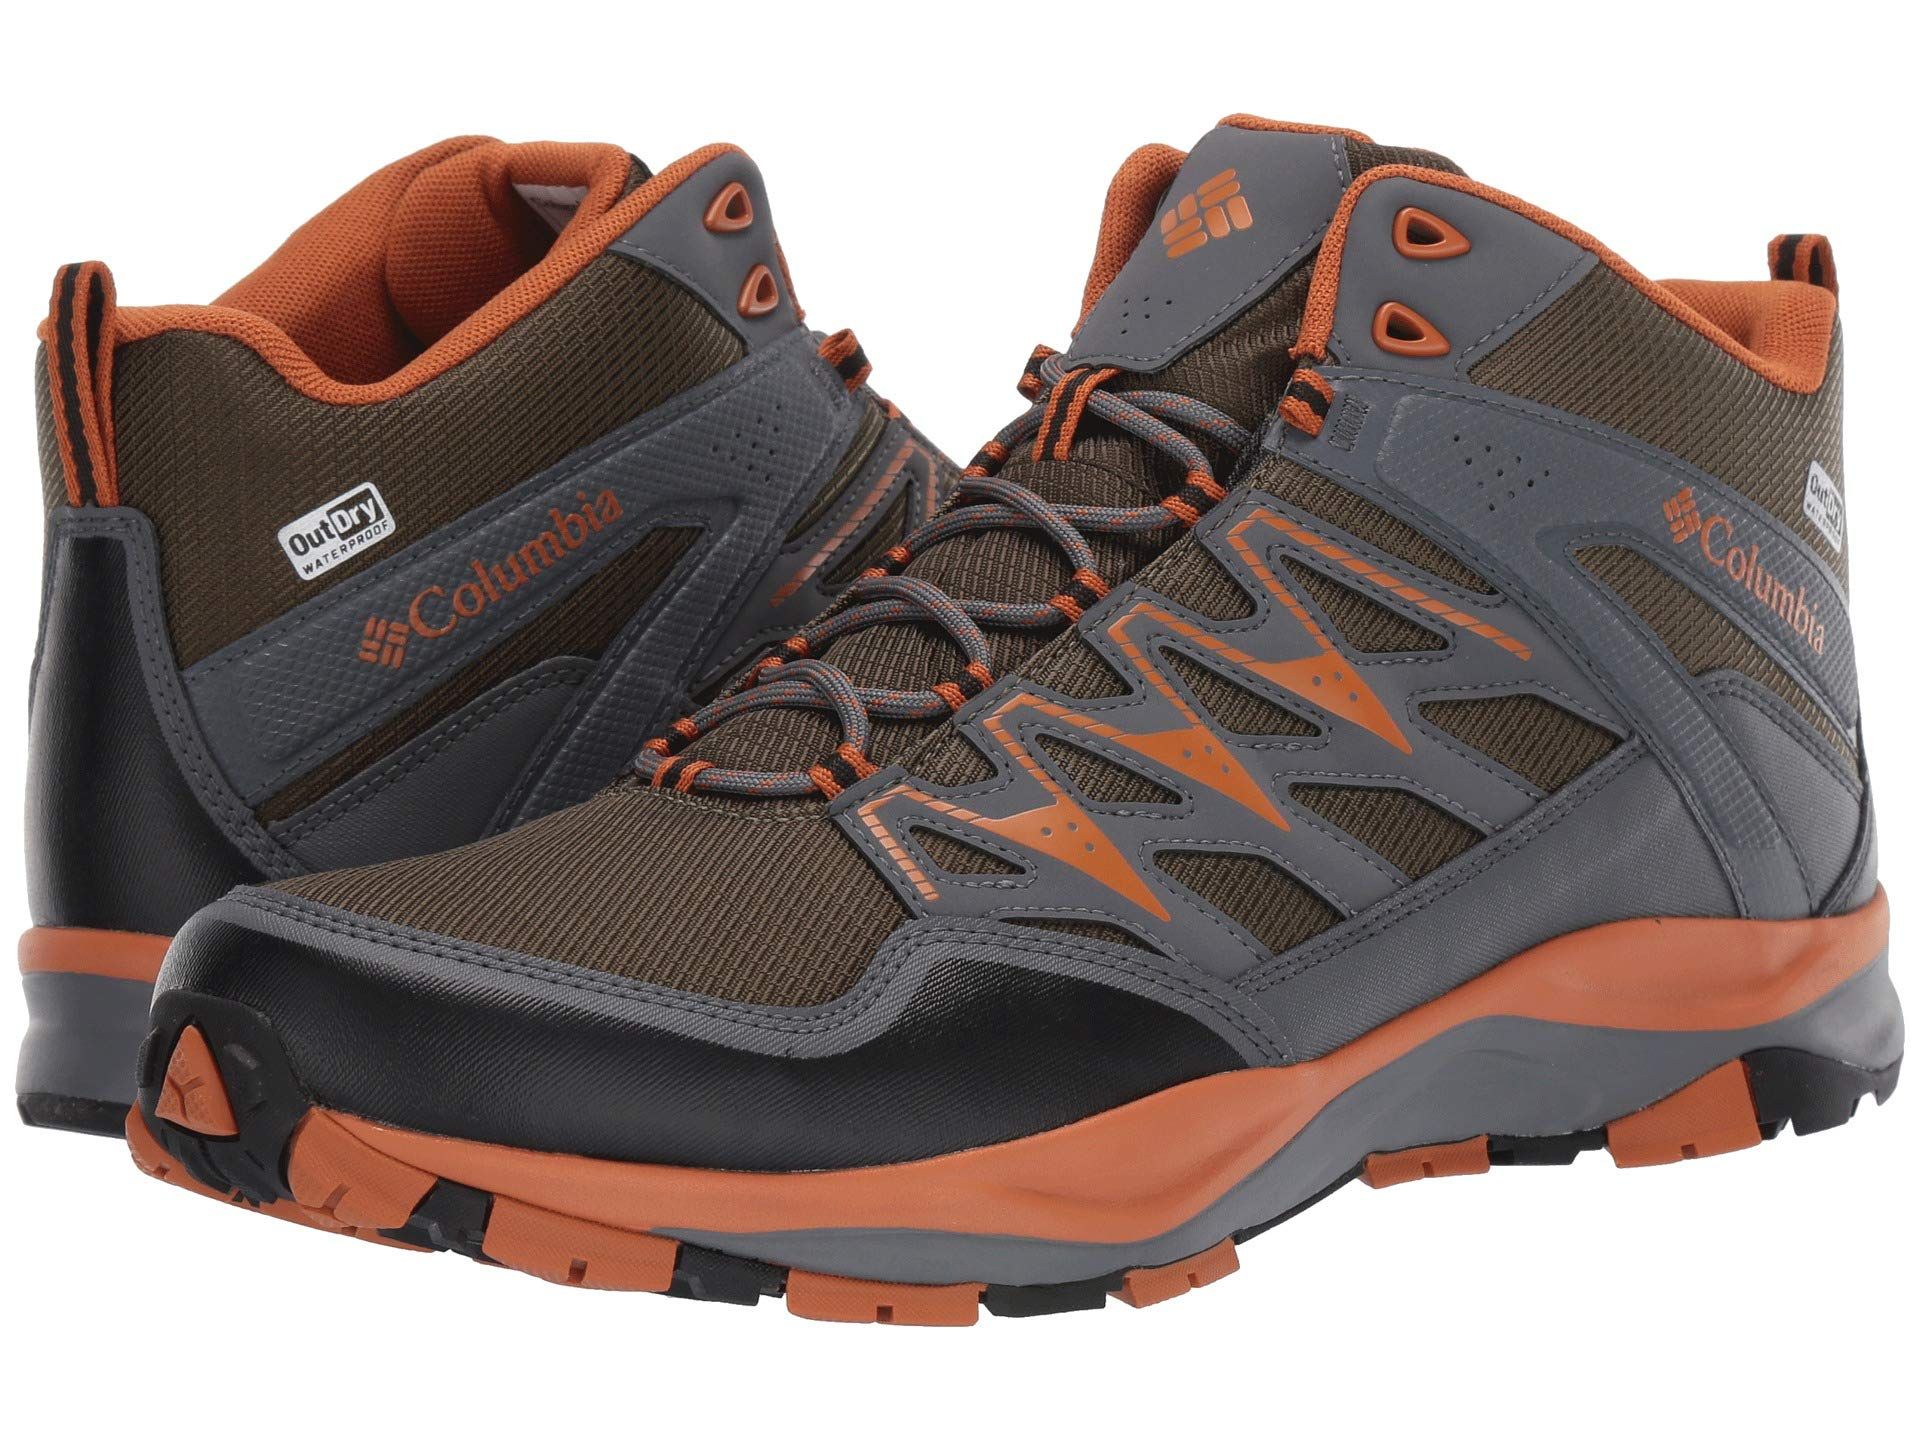 10 Best Hiking Boots and Shoes to Take On Any Trail or Trek